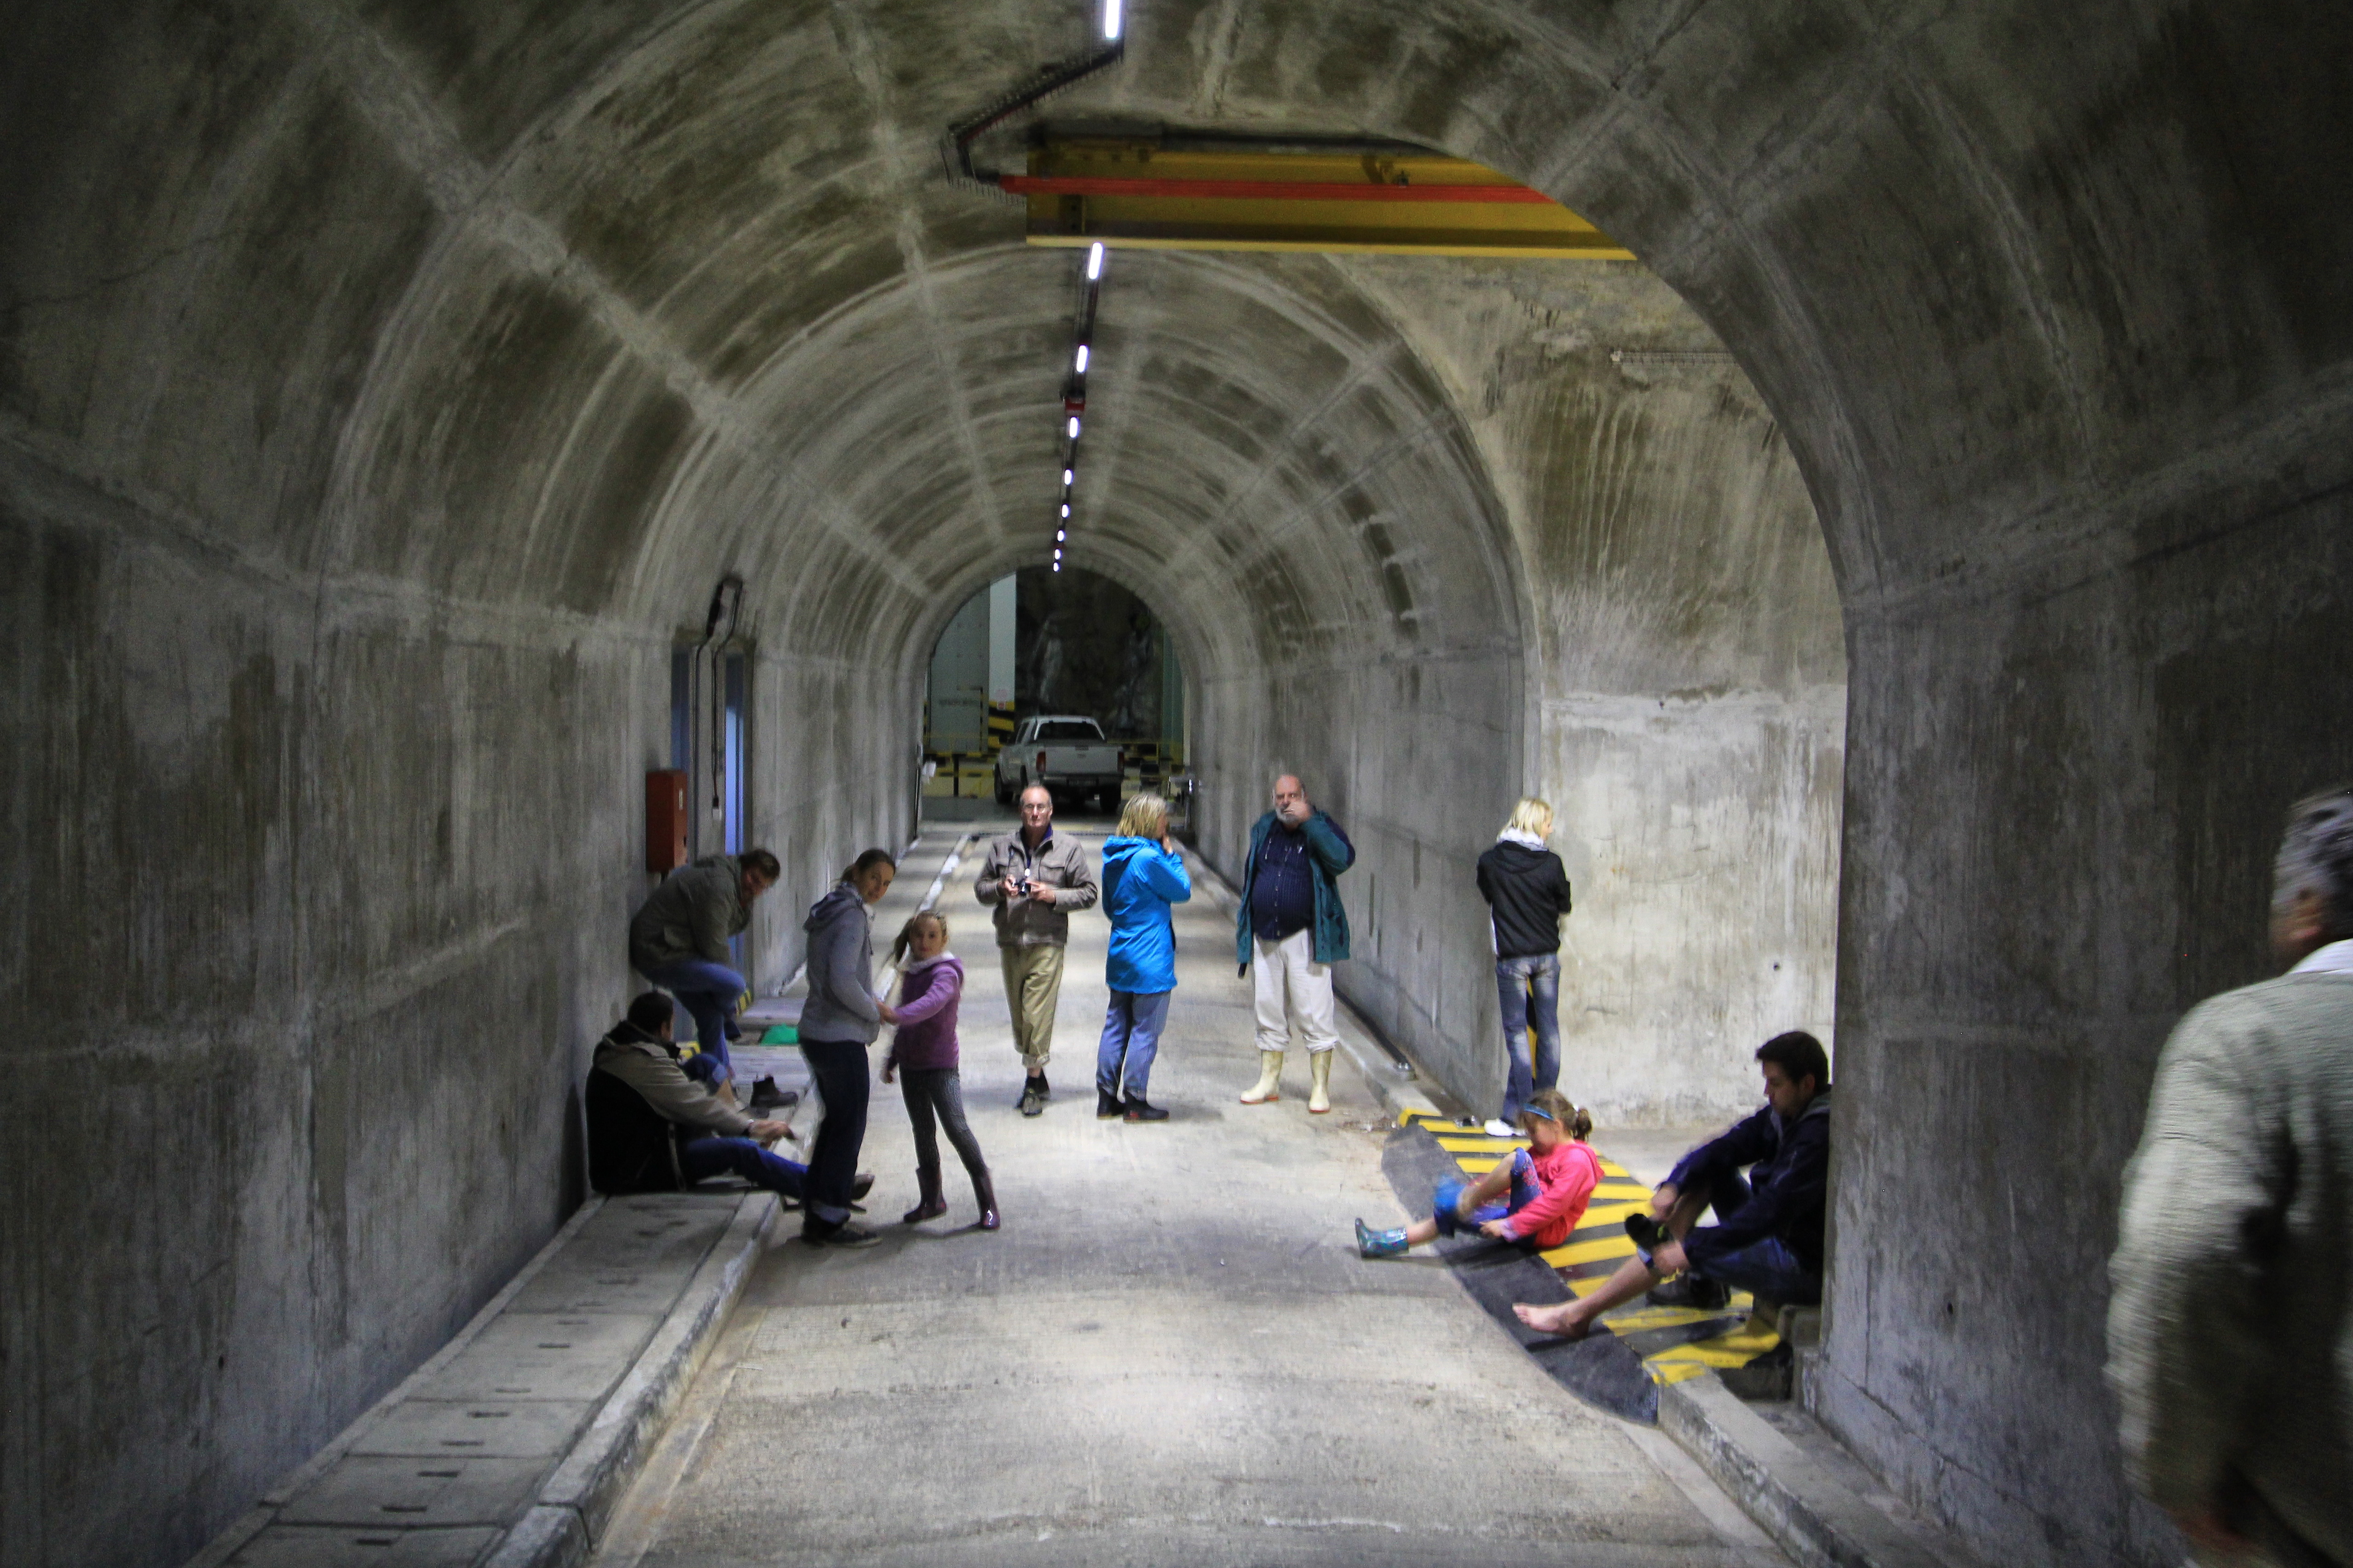 A small group of visitors, about the enter the dark, damp tunnels below. Image: Chris Marais